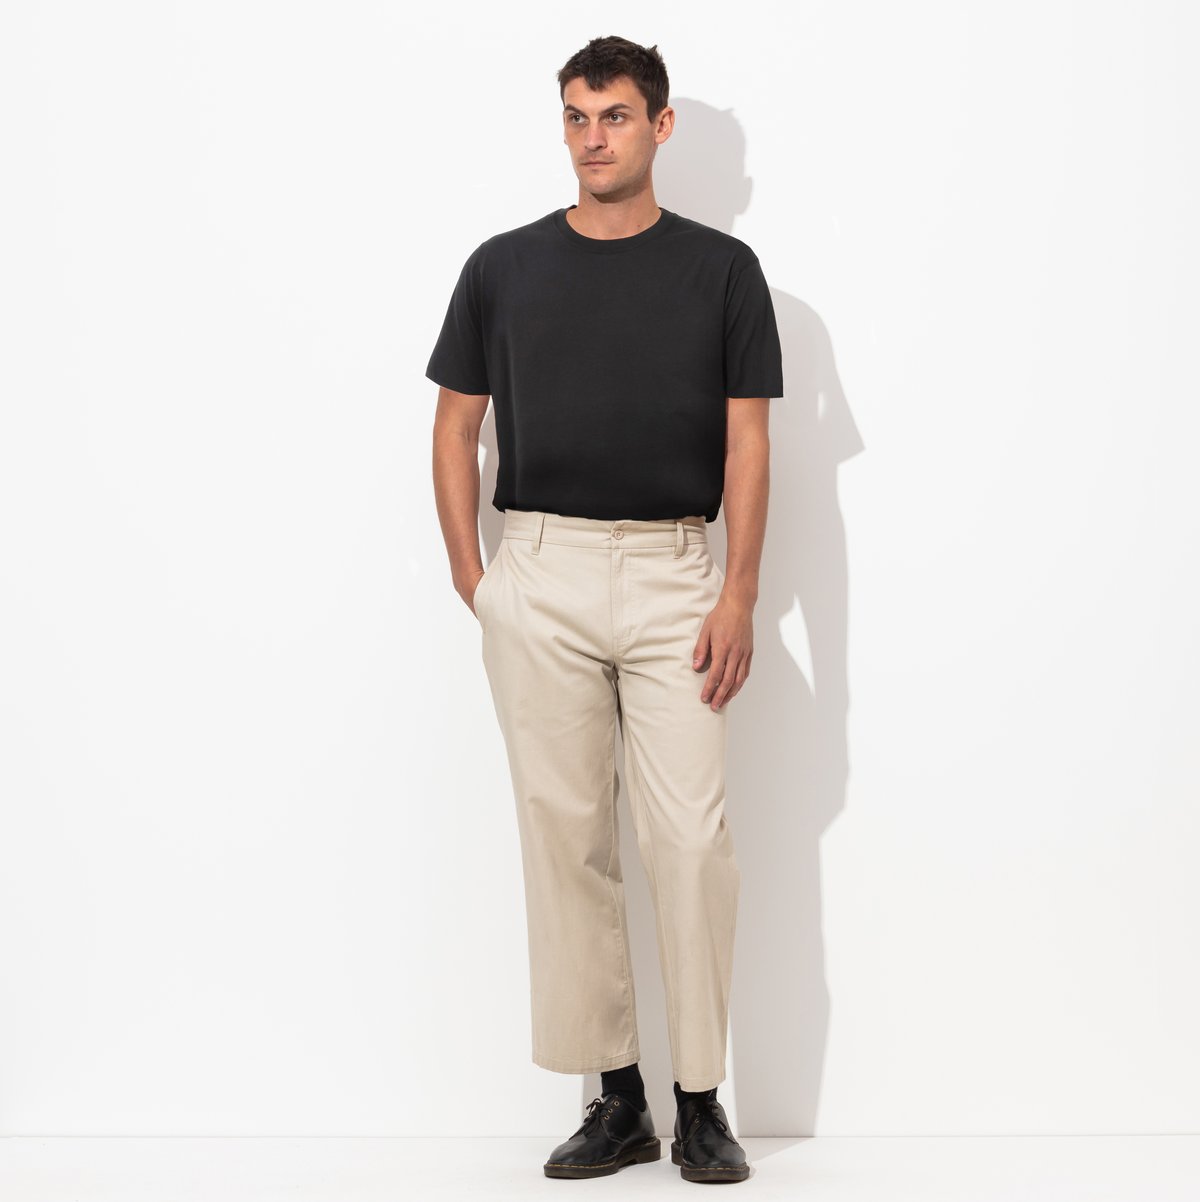 BANKS JOURNAL FEDERAL PANTS- AVAILABLE IN 2 COLORS